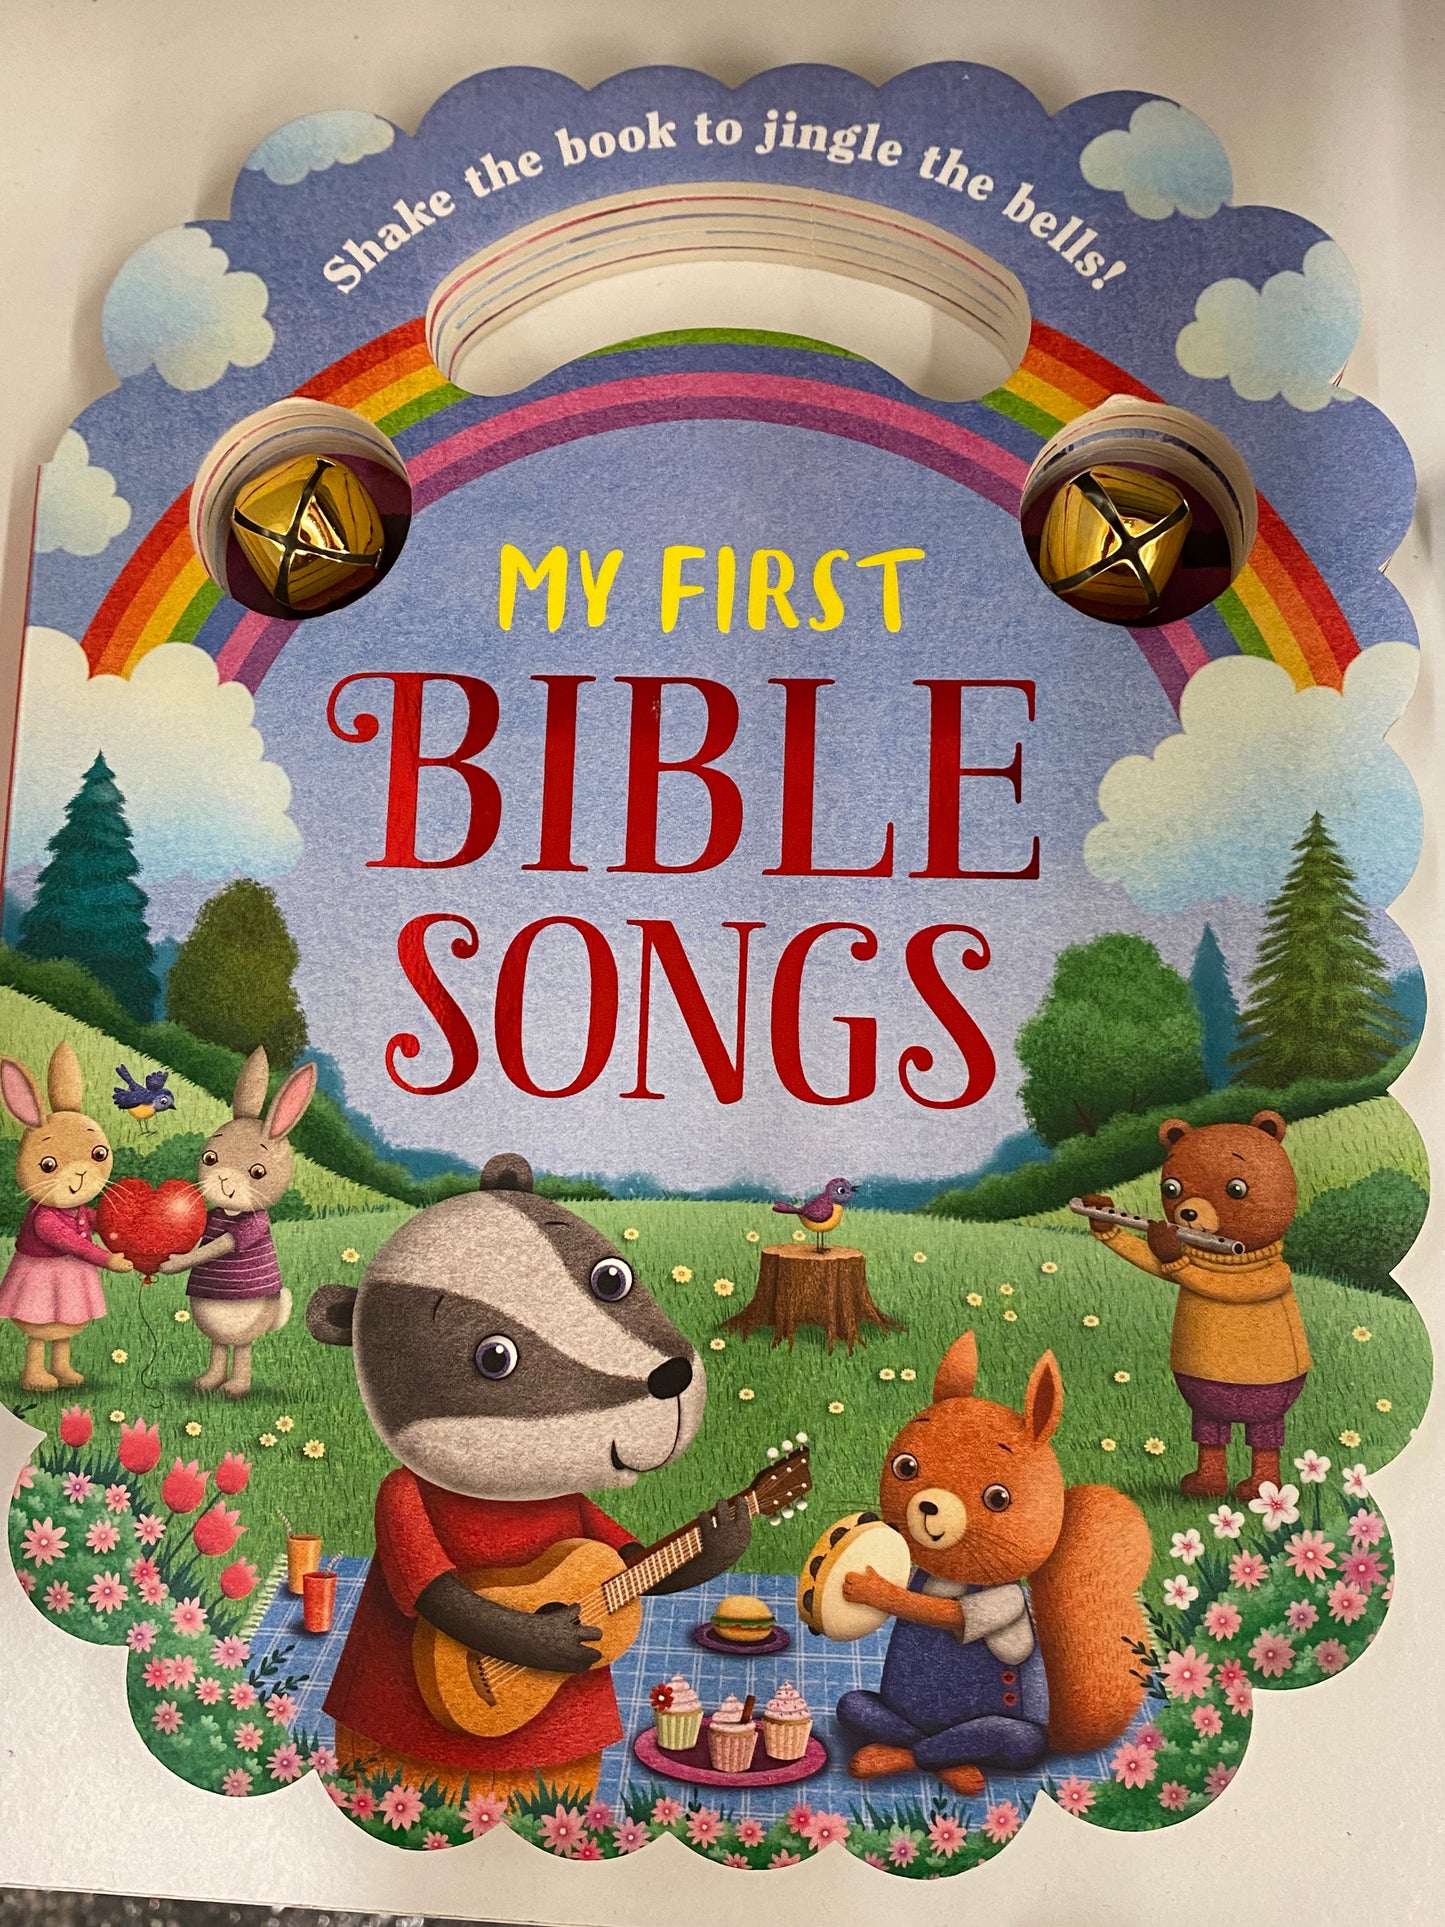 My first Bible songs